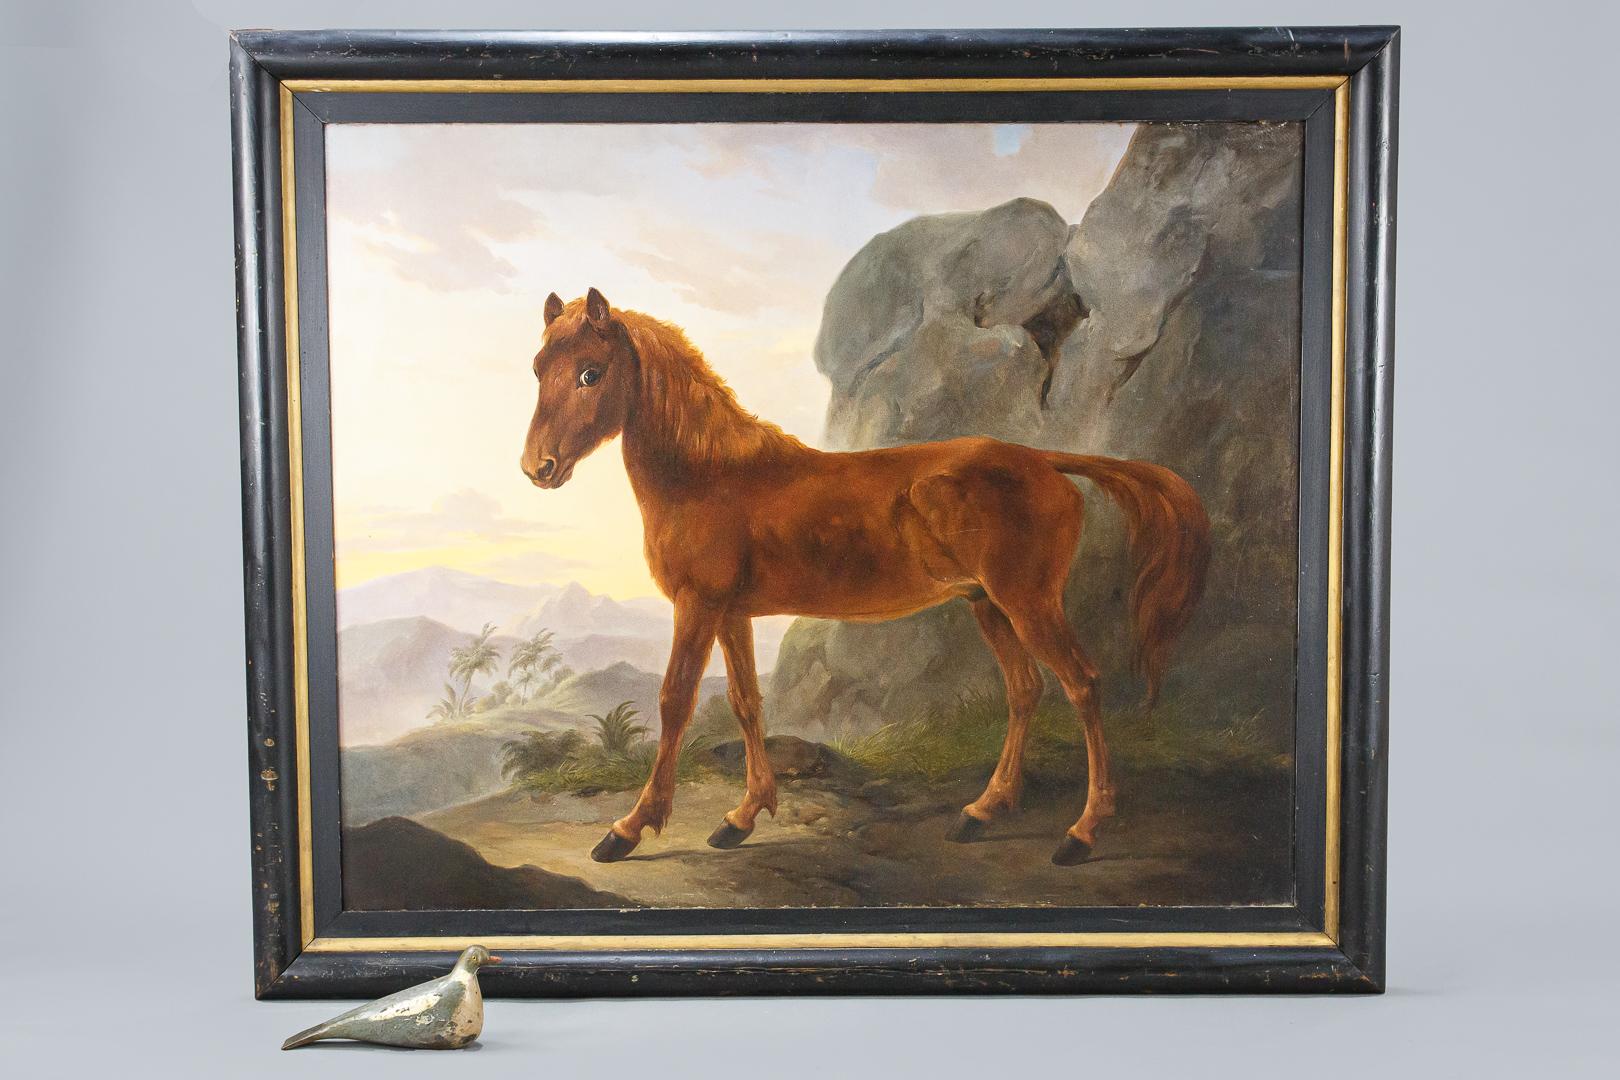 Vast scale oil on canvas painting of a young horse or foal at sunset in a countryside setting. The painting itself has had restoration over the years and is in good condition, the frame is original to the painting and has marks and blemishes